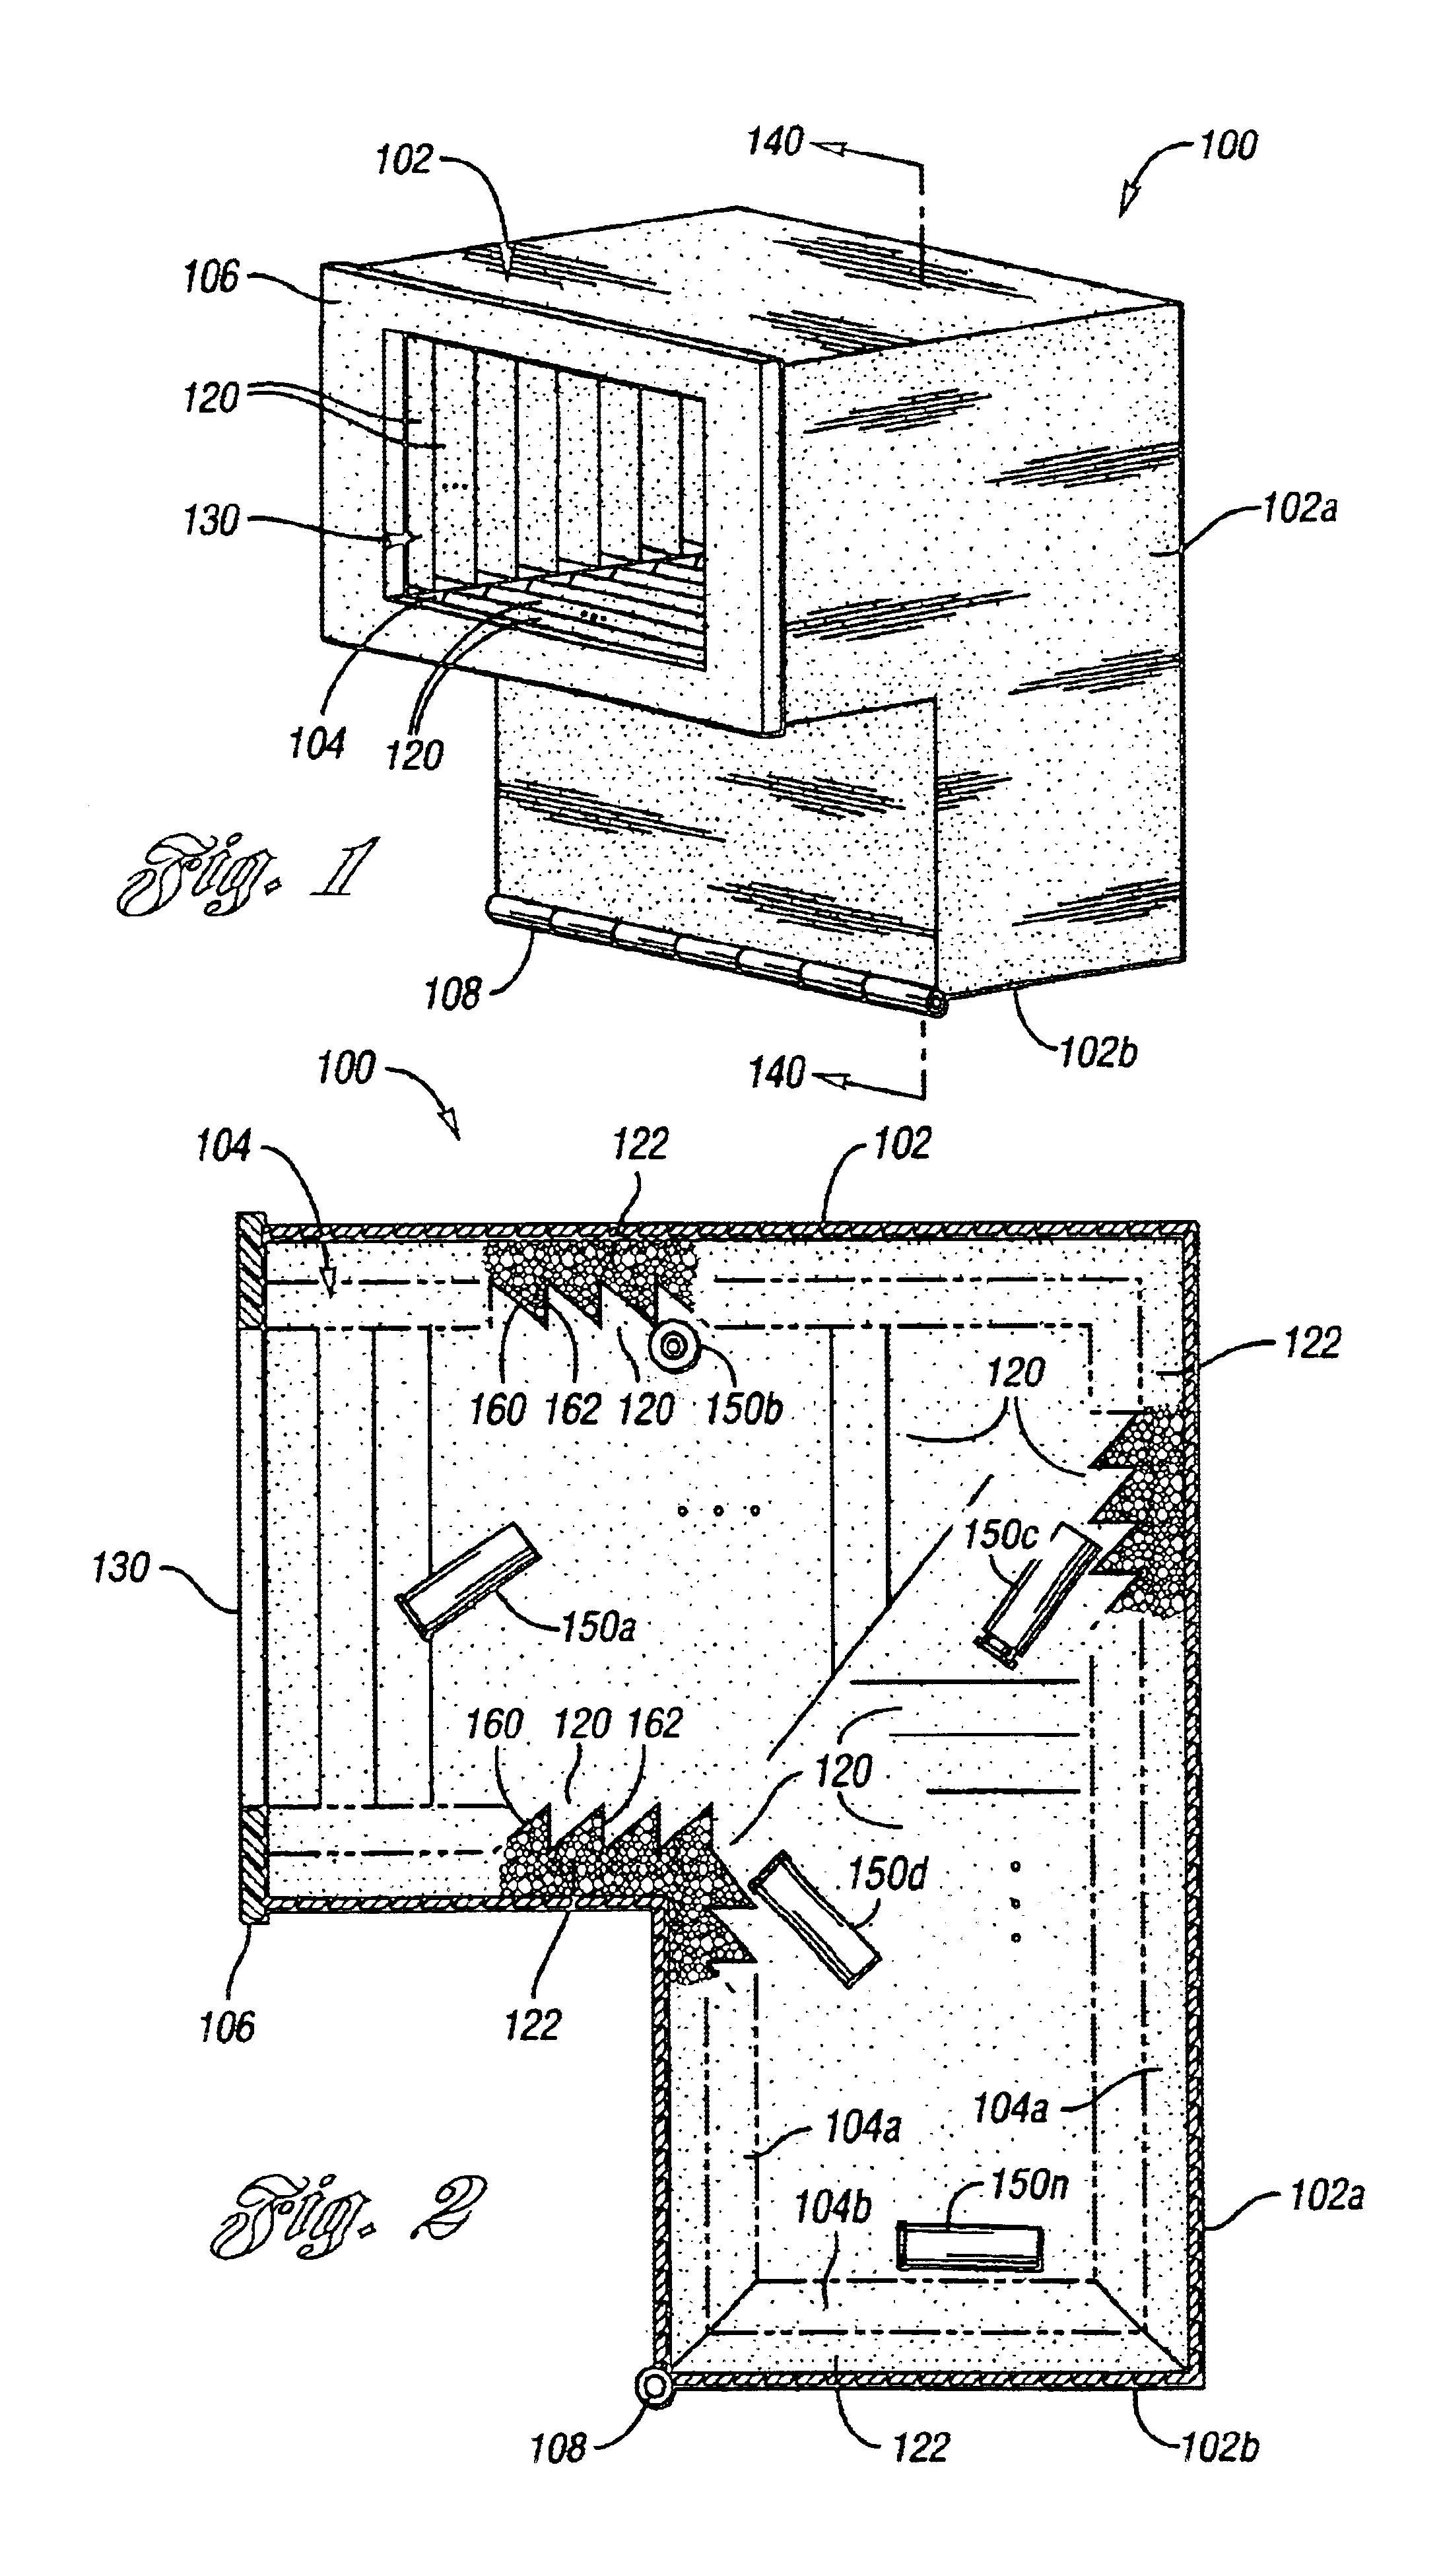 System and method for a cartridge casing catcher